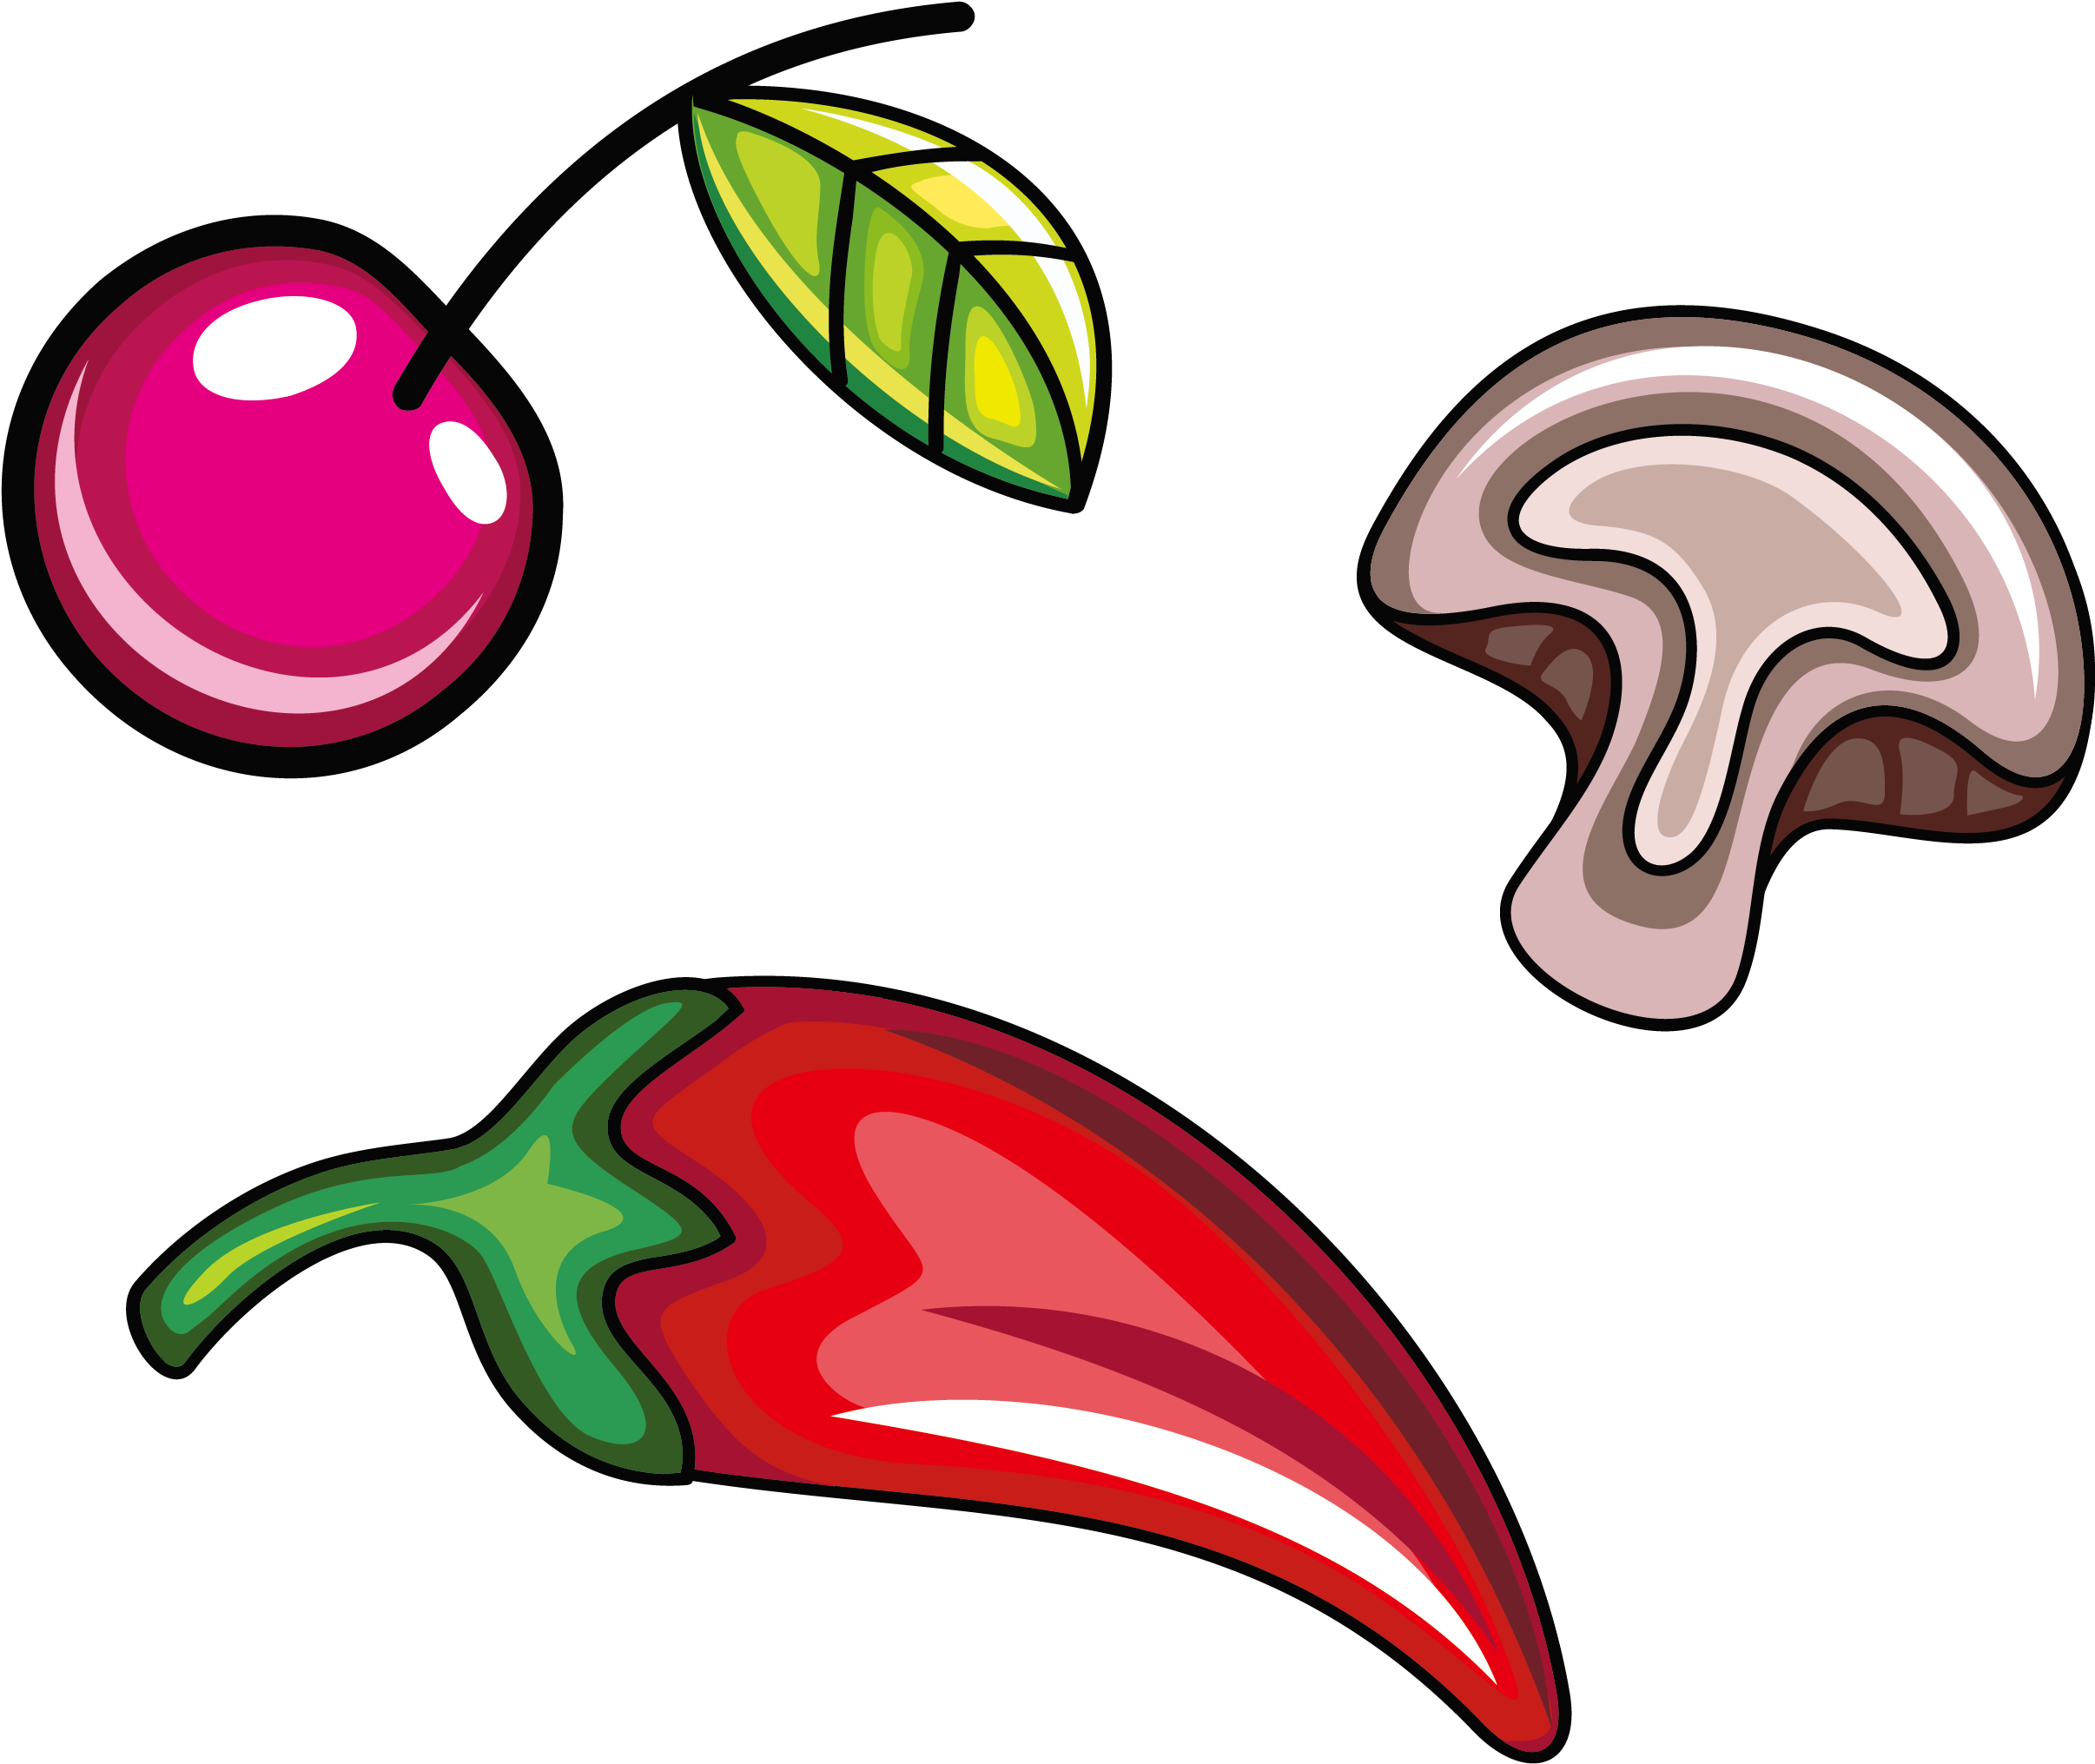 Fruit Facing Heaven Pepper Clip Art And - Sweet And Chili Peppers (2917x2917)